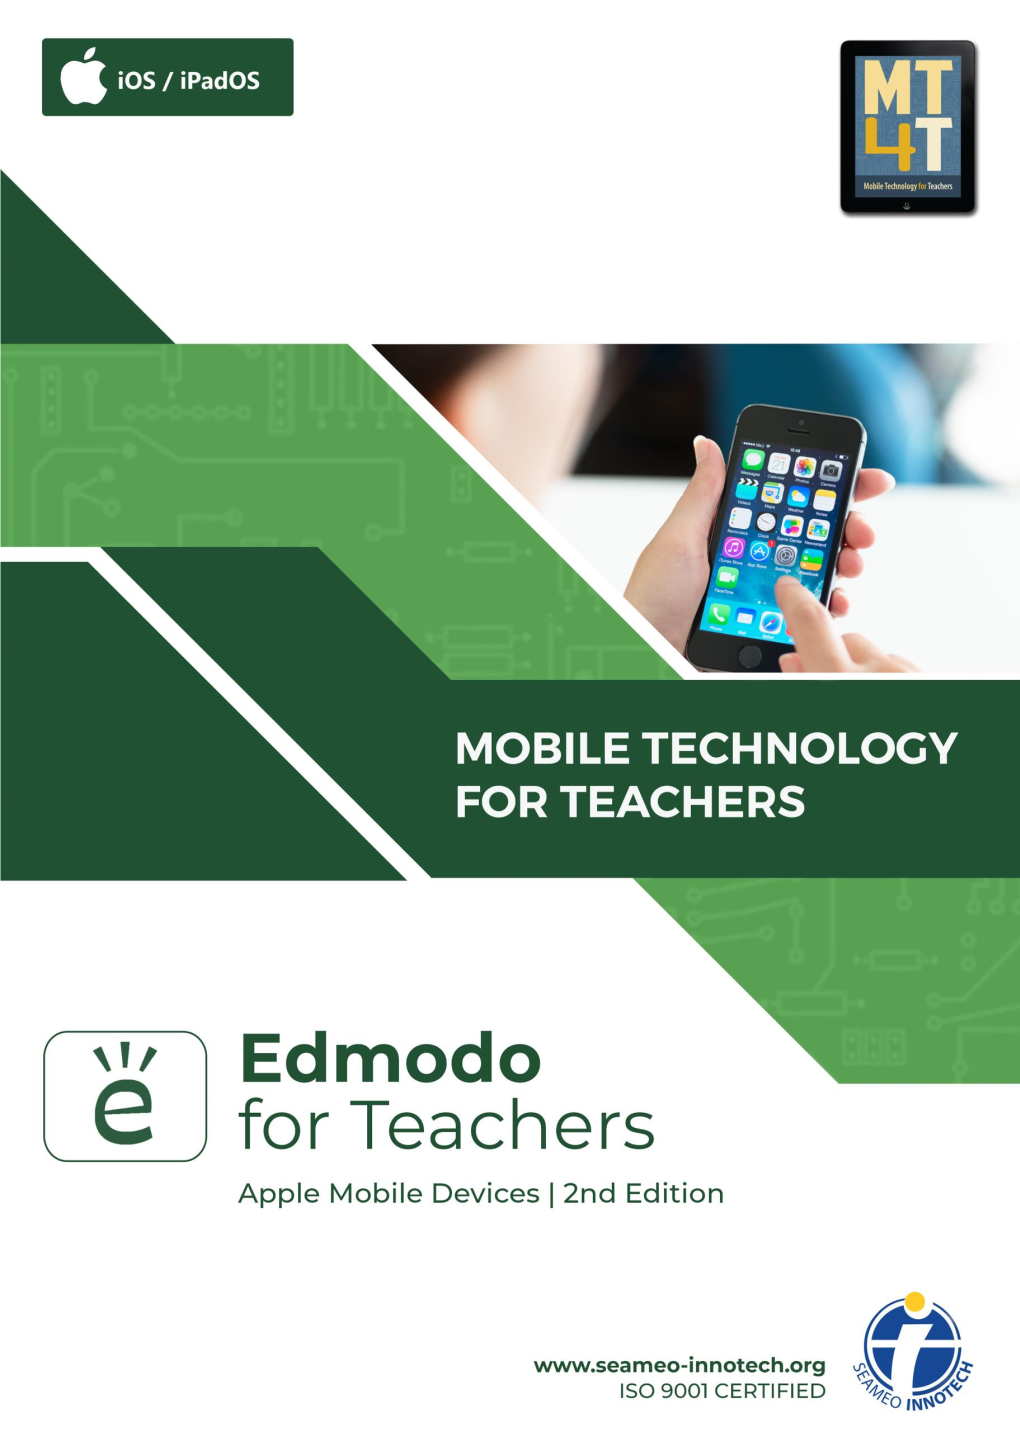 Edmodo for Teachers Apple Mobile Devices | 2Nd Edition